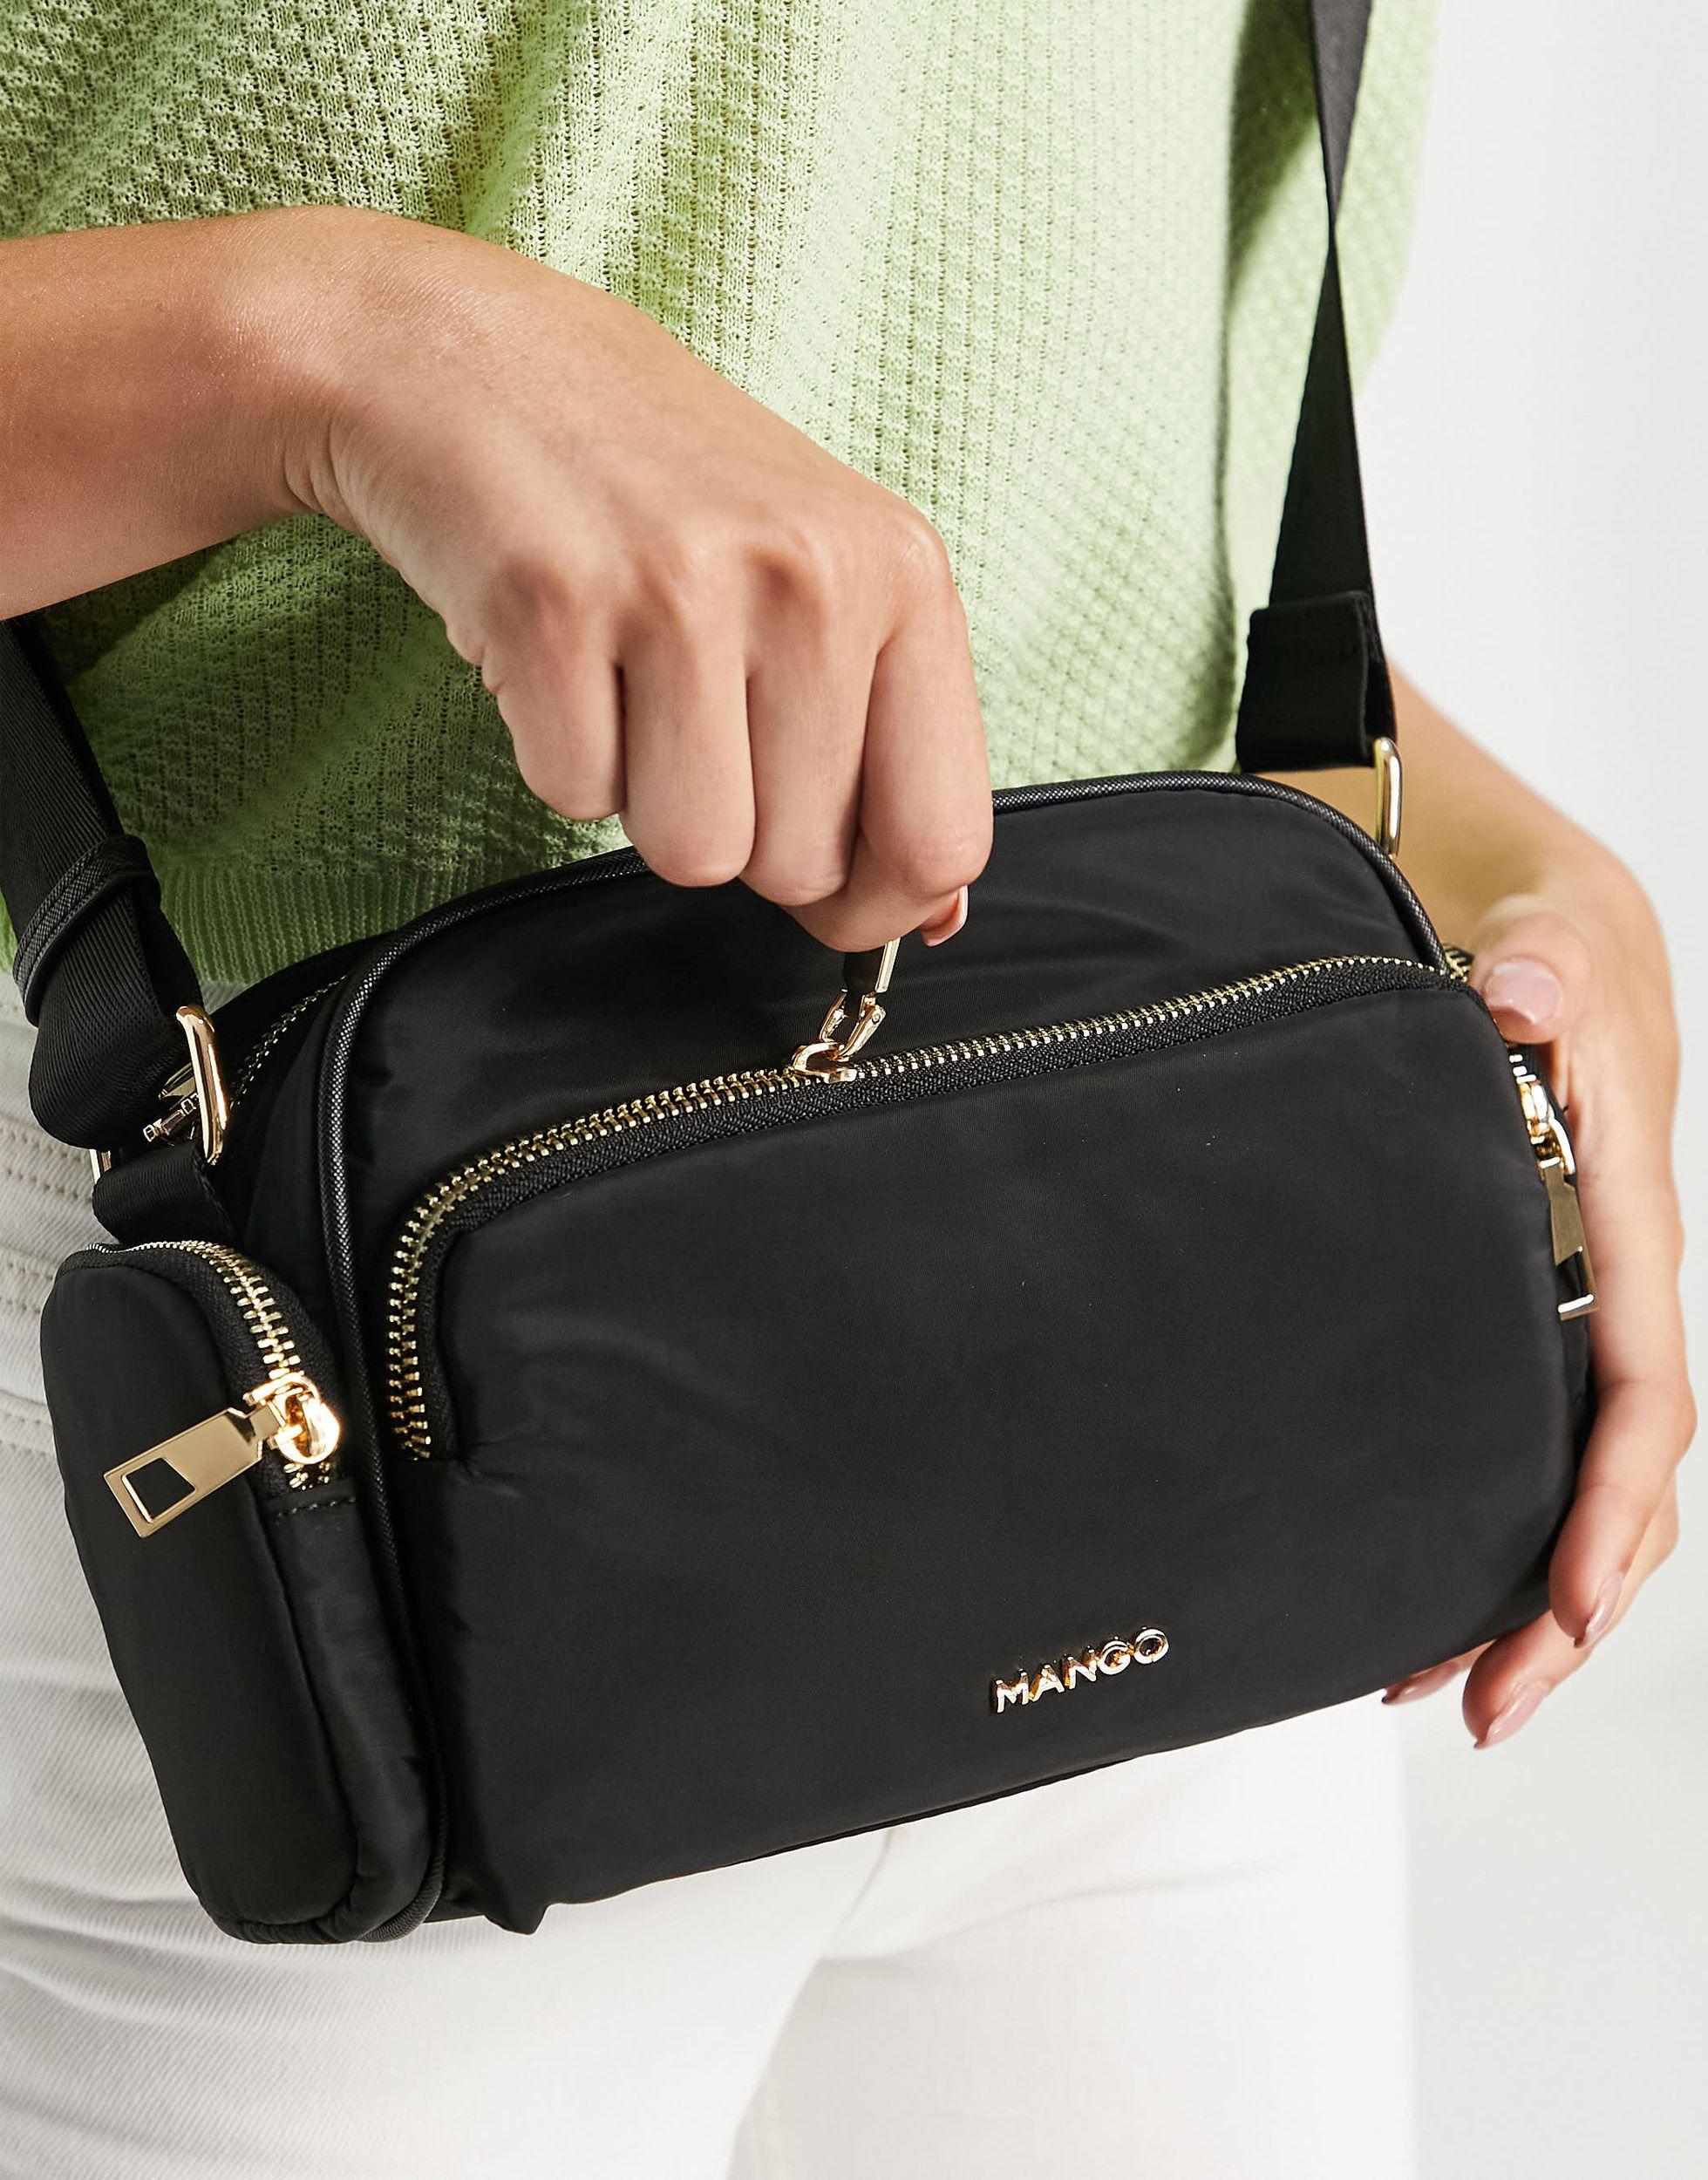 Mango Multi Compartment Cross Body Bag With Zip Detail in Black